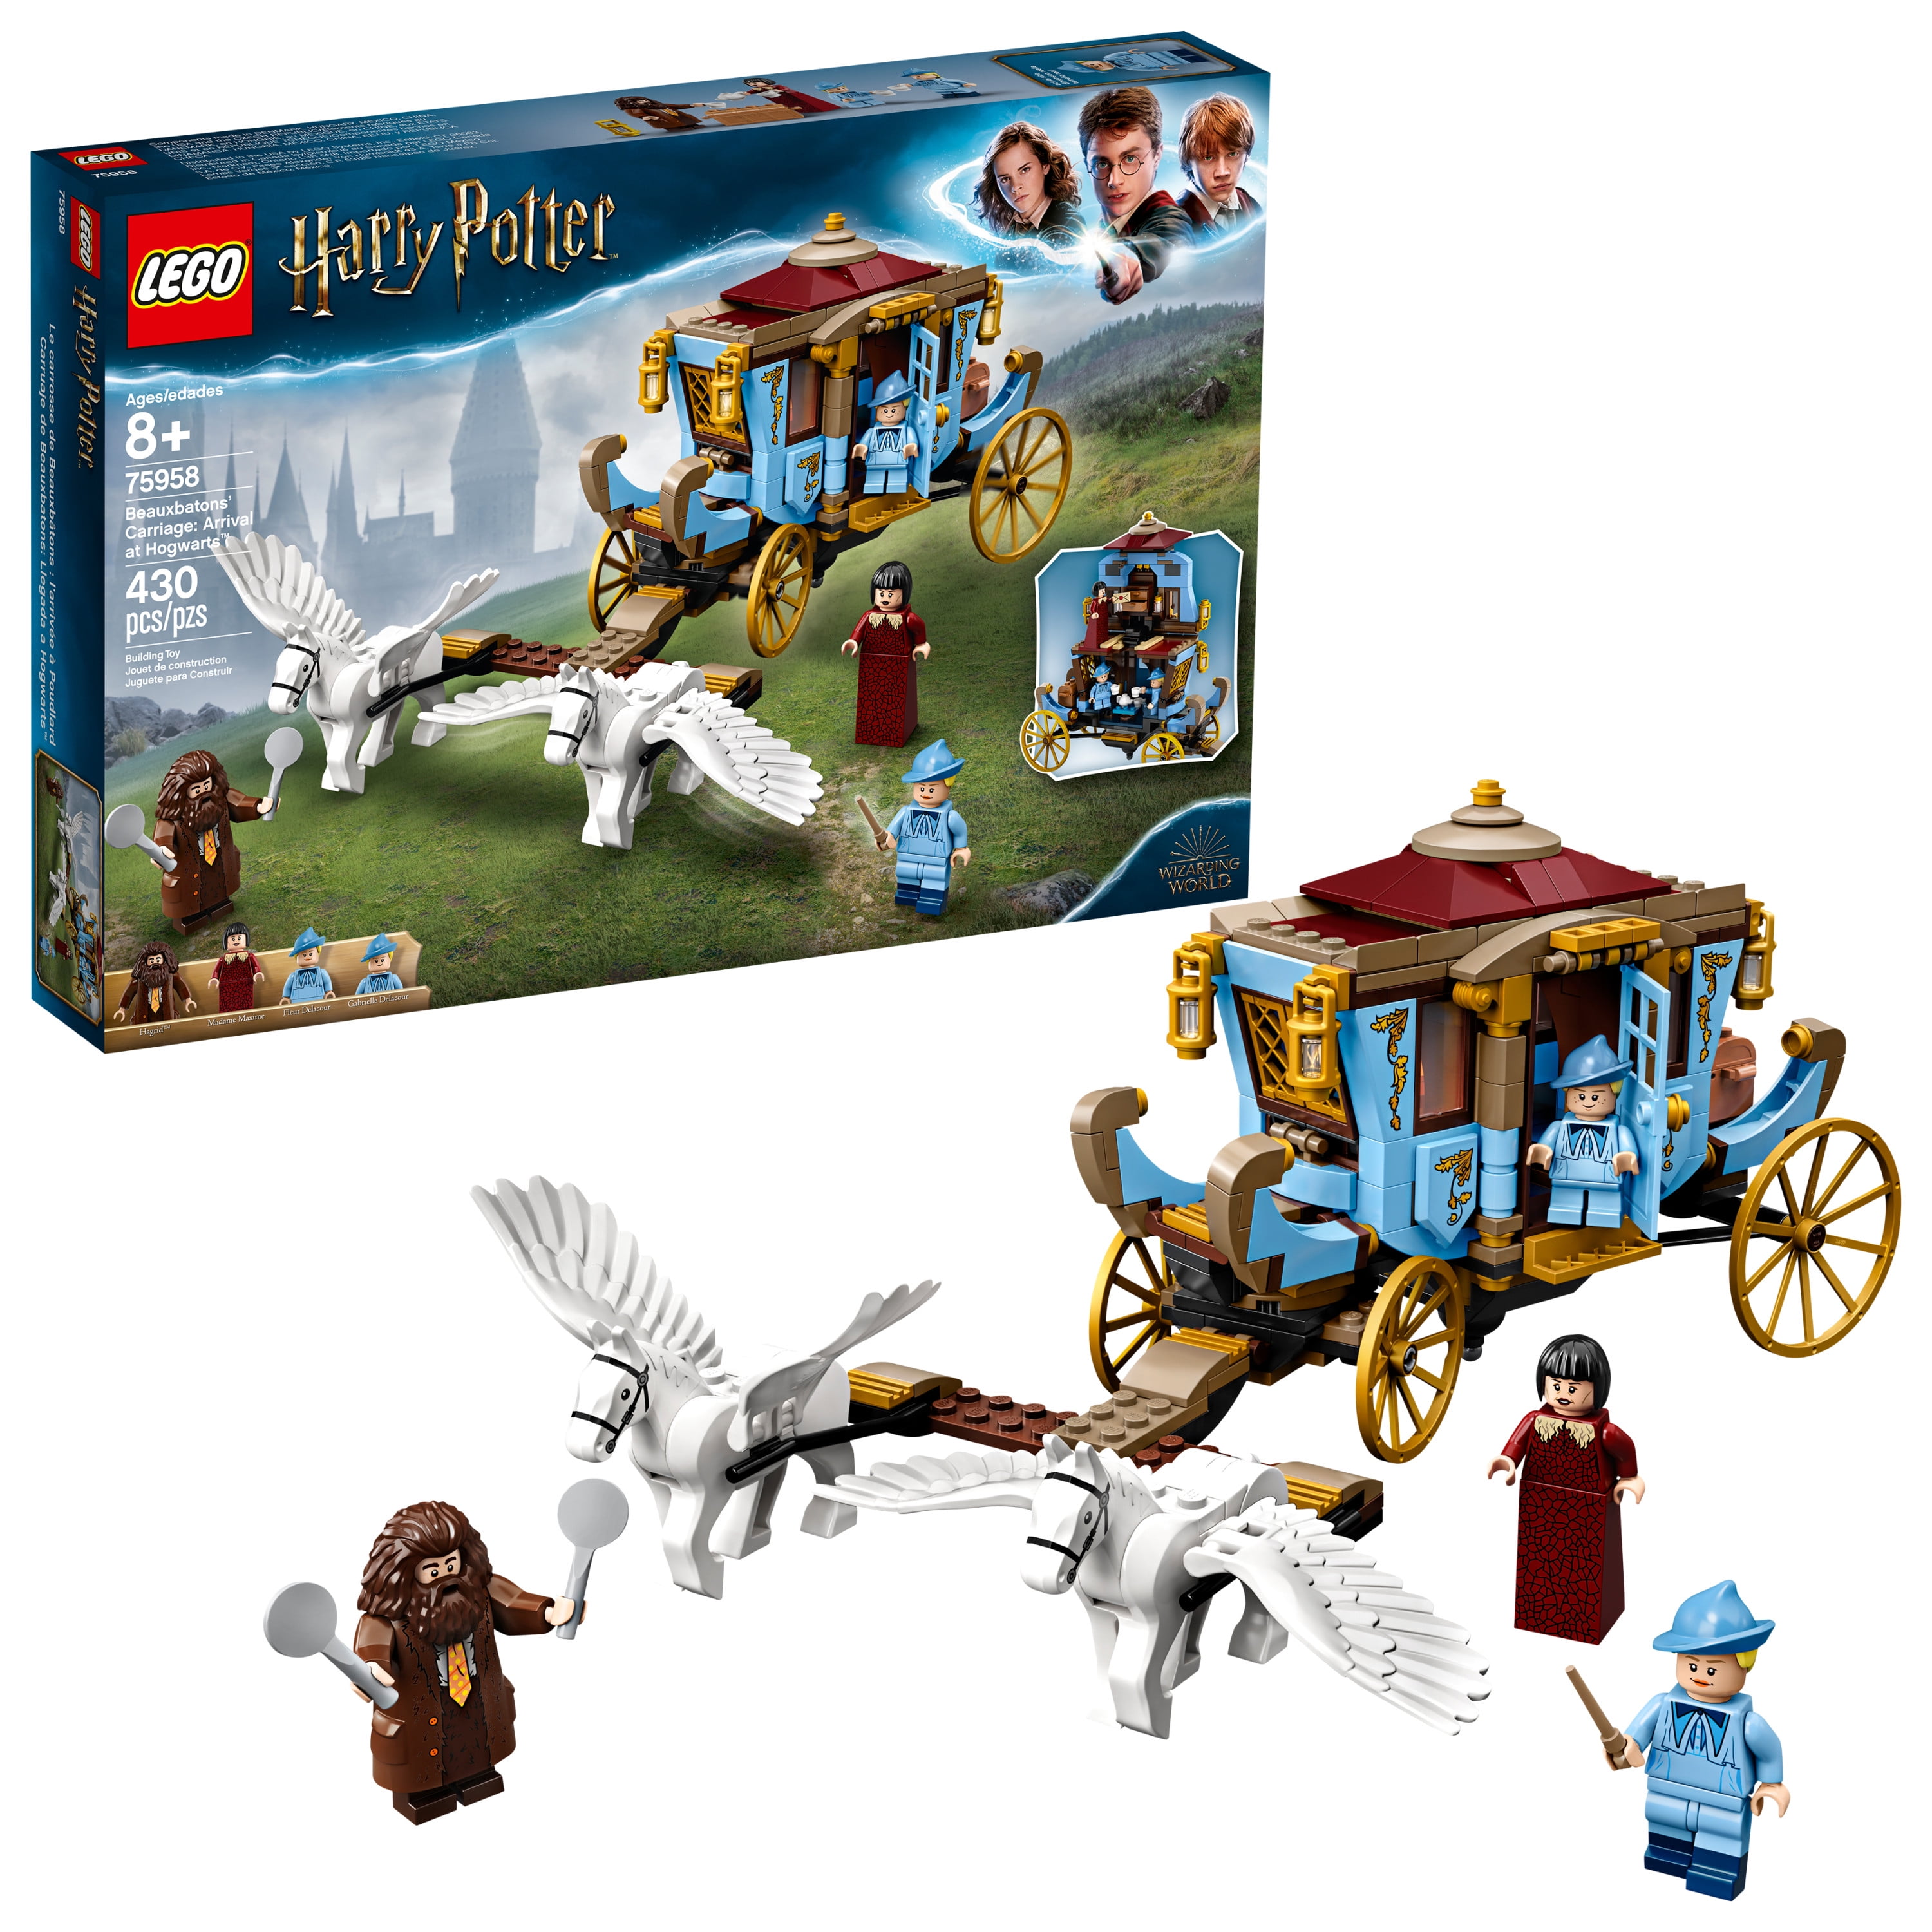 LEGO Harry Potter and the Goblet of Fire Beauxbatons' Carriage: Arrival at  Hogwarts 75958 Wizard Hagrid Horses Building Toy (430 Pieces) - Walmart.com